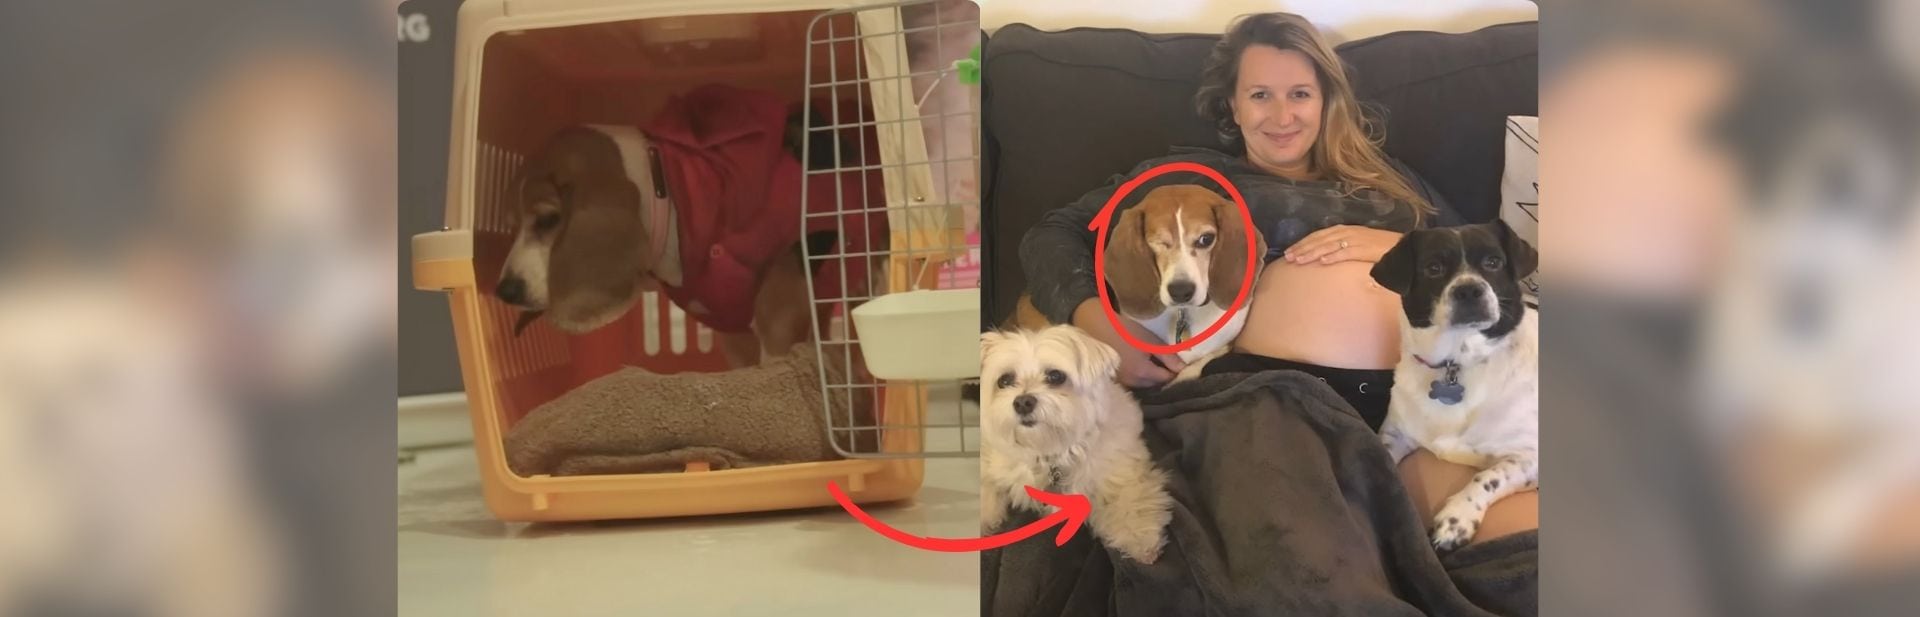 Once a Lab Test Subject, This Beagle Embraces a Joyful New Life